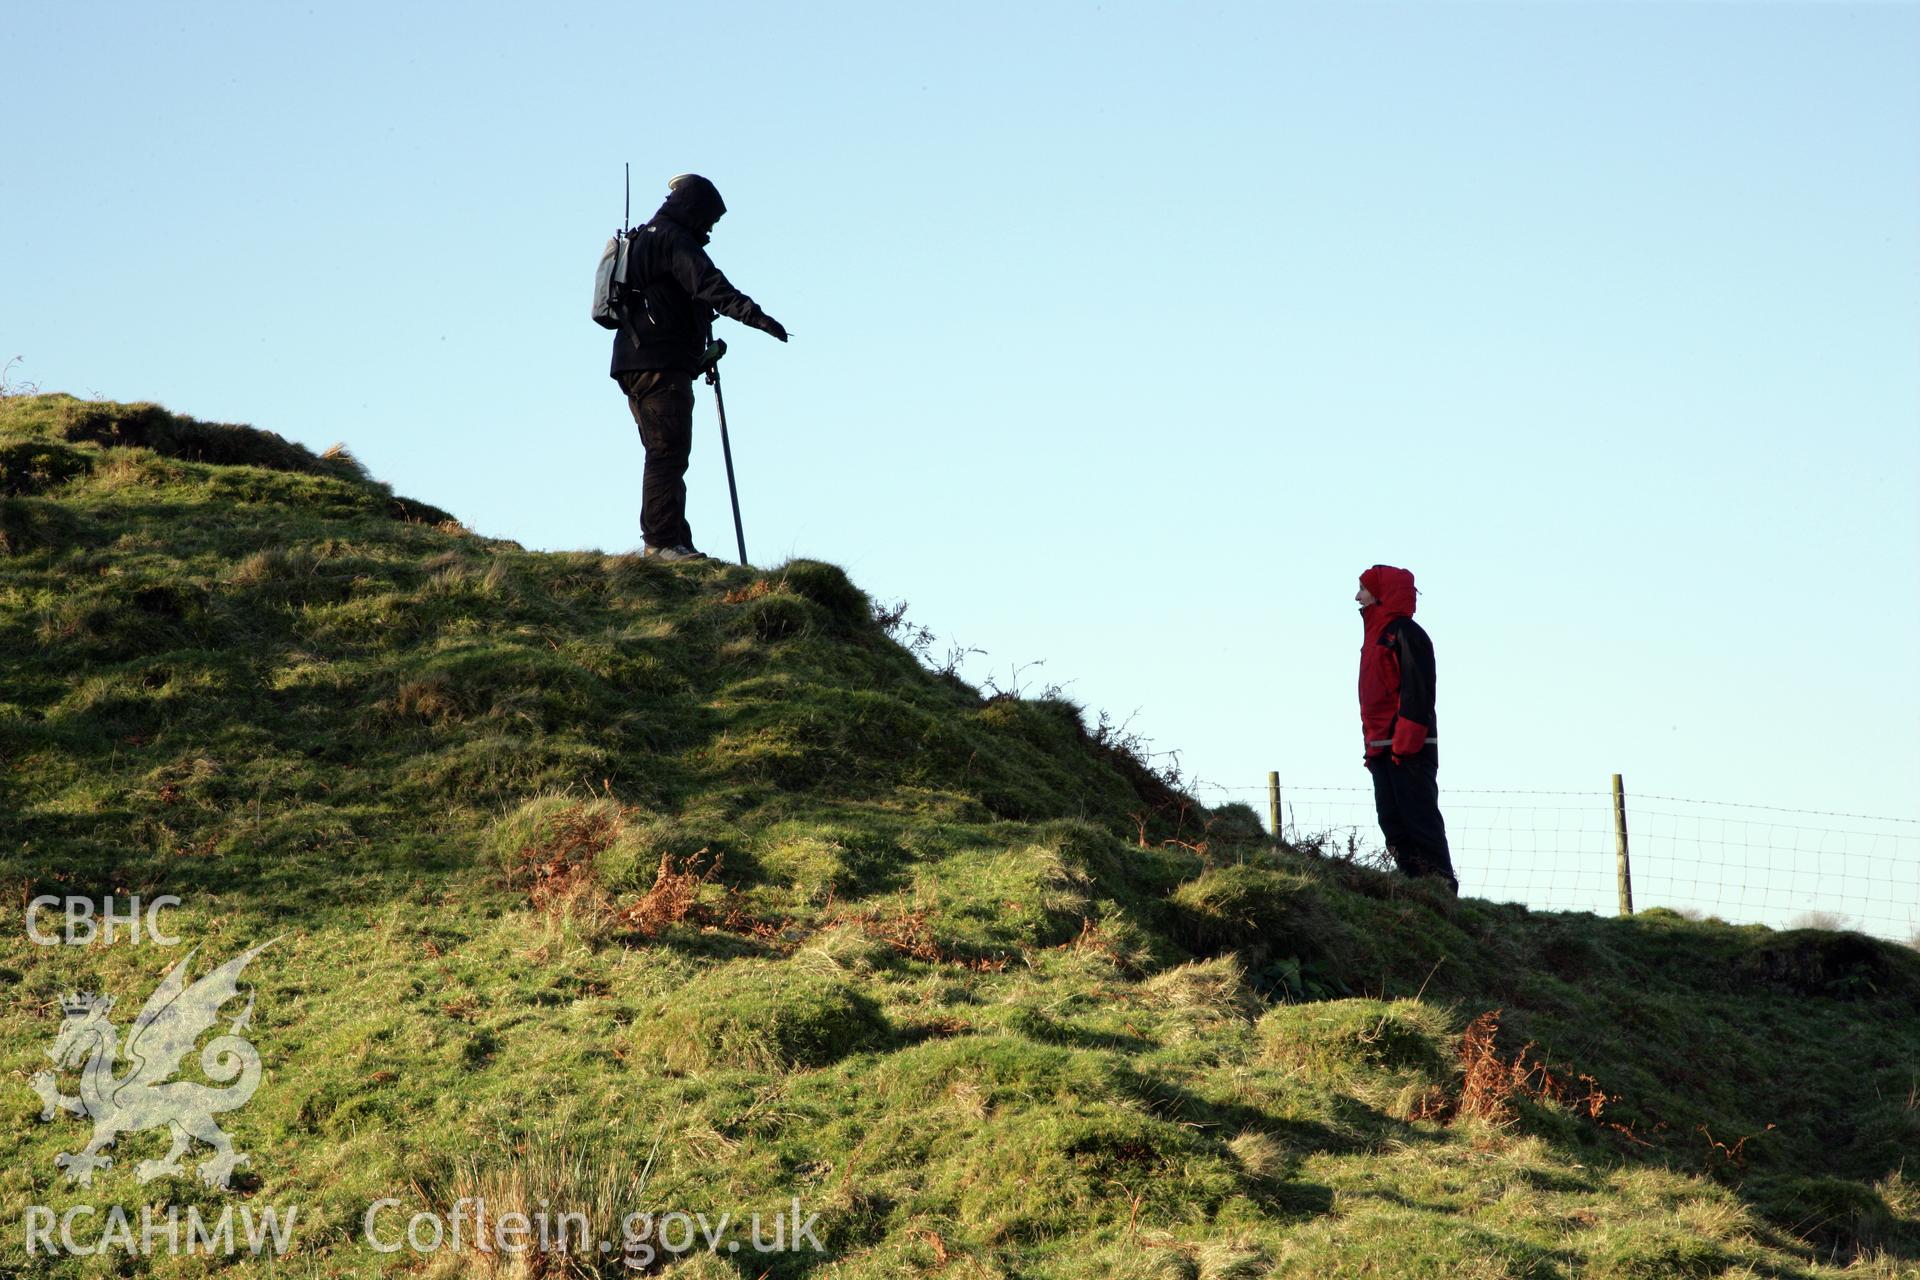 Castell Grogwynion hillfort, Royal Commission survey 2012, Oliver Davis and Louise Barker surveying